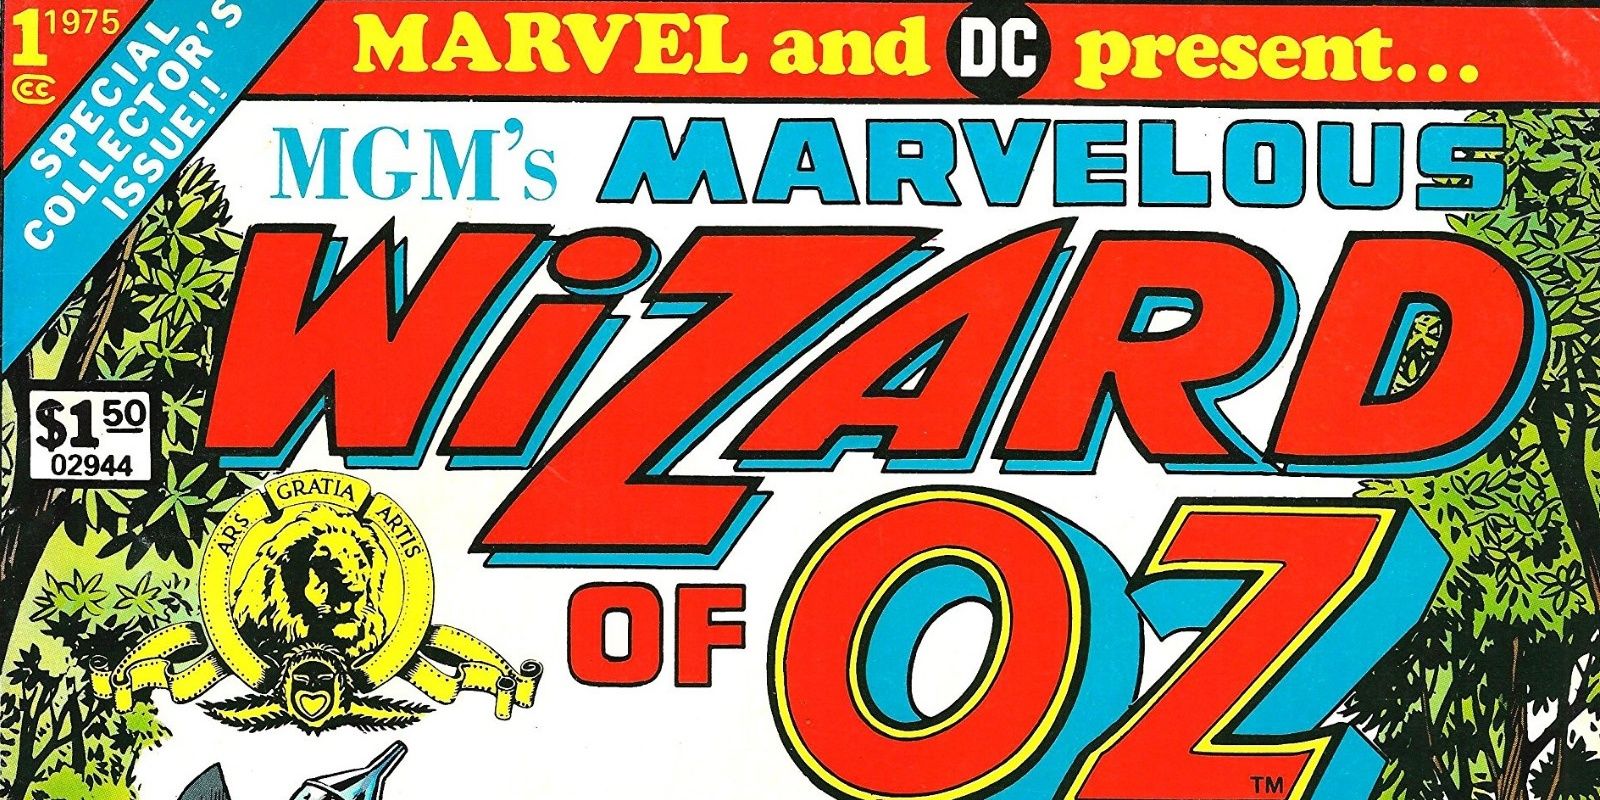 Marvelous Wizard of Oz 1975 cover